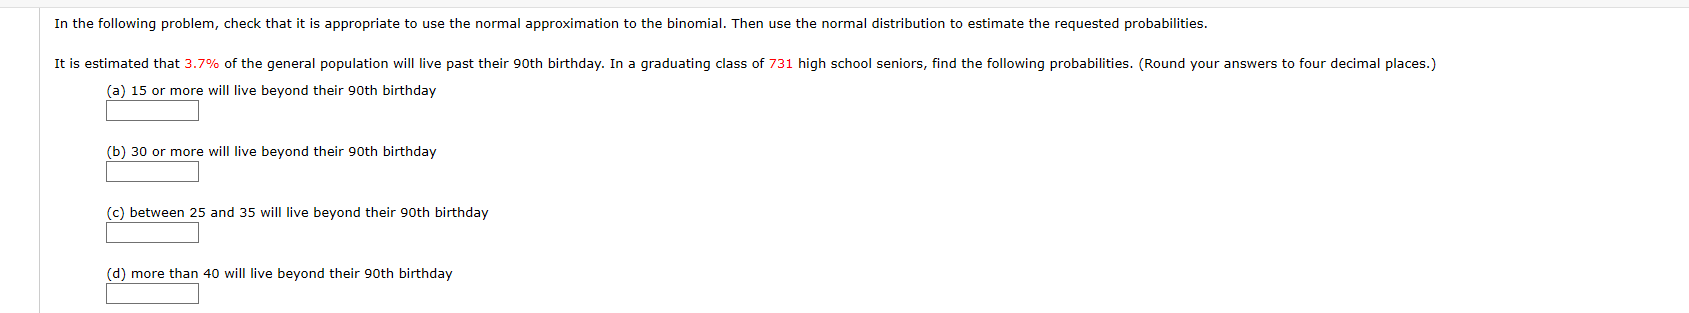 In the following problem, check that it is appropriate to use the normal approximation to the binomial. Then use the normal distribution to estimate the requested probabilities.
It is estimated that 3.7% of the general population will live past their 90th birthday. In a graduating class of 731 high school seniors, find the following probabilities. (Round your answers to four decimal places.)
(a) 15 or more will live beyond their 90th birthday
(b) 30 or more will live beyond their 90th birthday
(c) between 25 and 35 will live beyond their 90th birthday
(d) more than 40 will live beyond their 90th birthday
